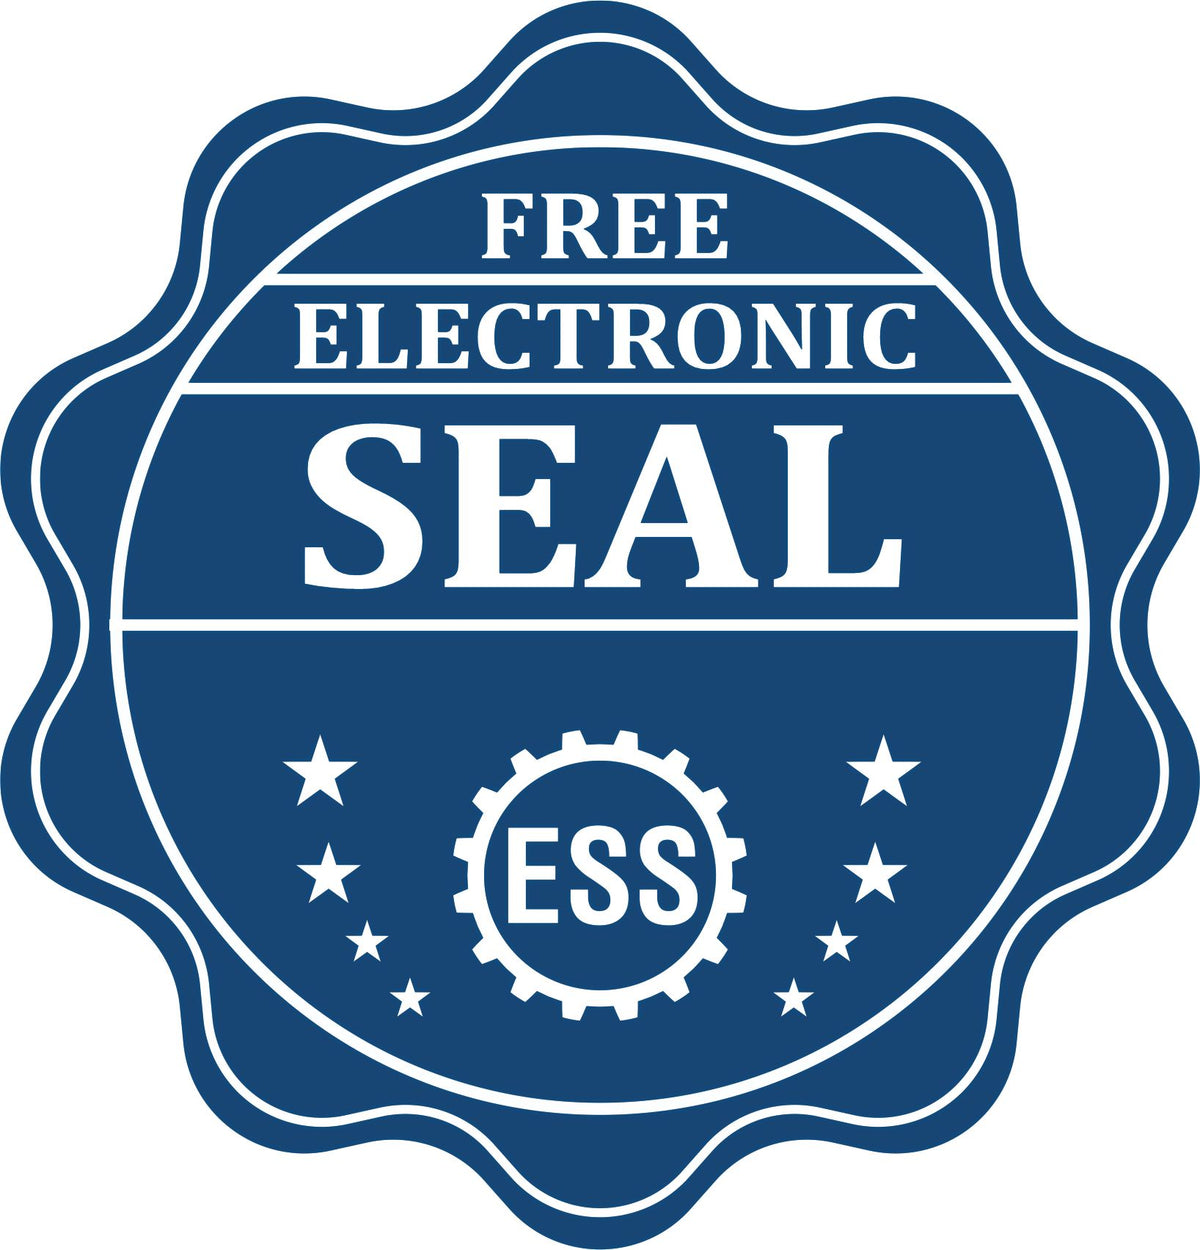 A badge showing a free electronic seal for the Premium MaxLight Pre-Inked Kansas Engineering Stamp with stars and the ESS gear on the emblem.